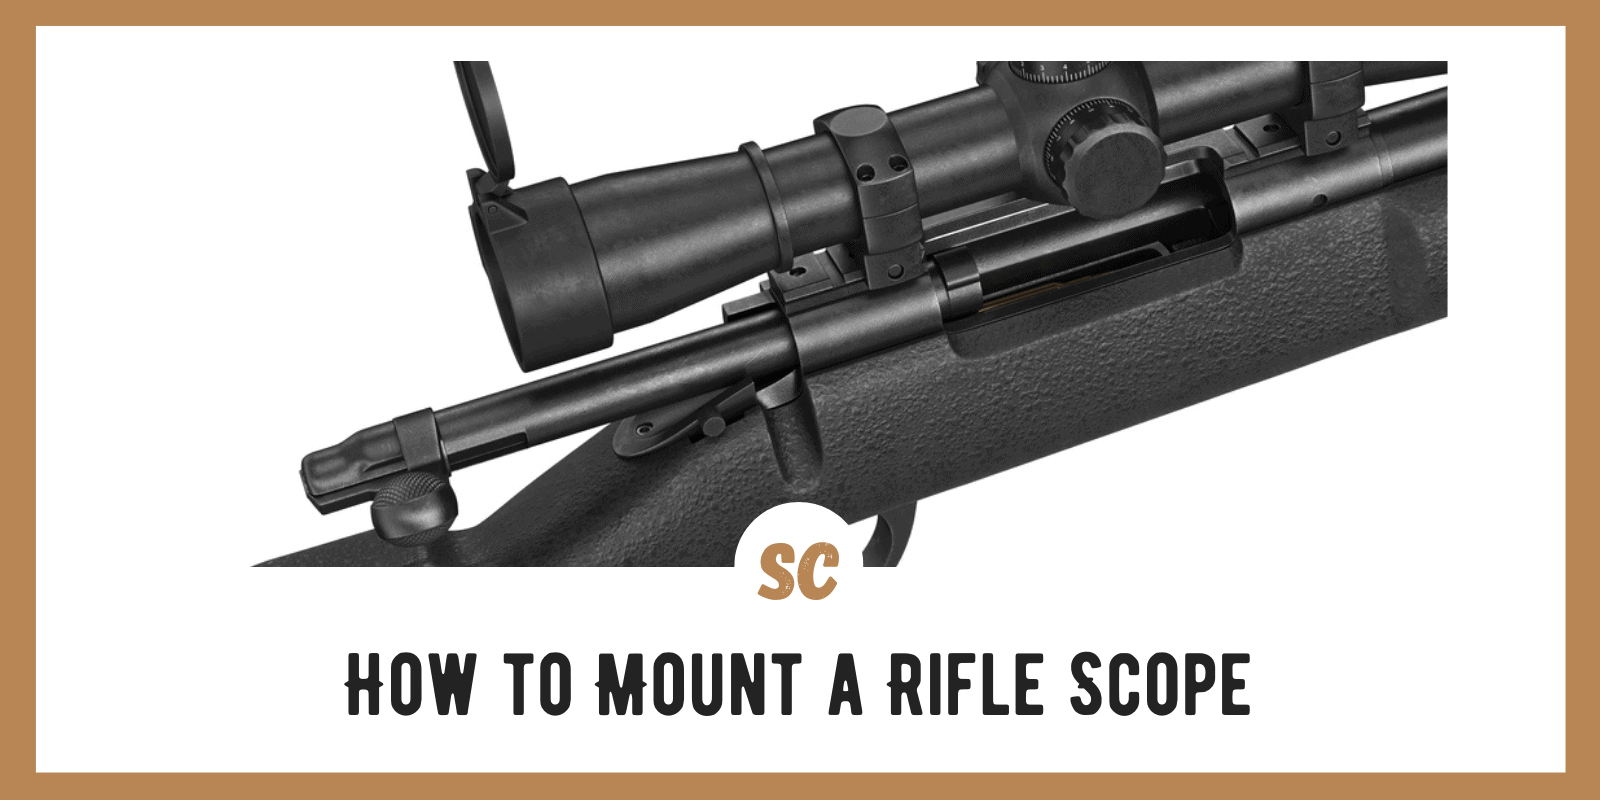 How to Mount a Rifle Scope: My Experience, Step by Step Process (With Pictures!)